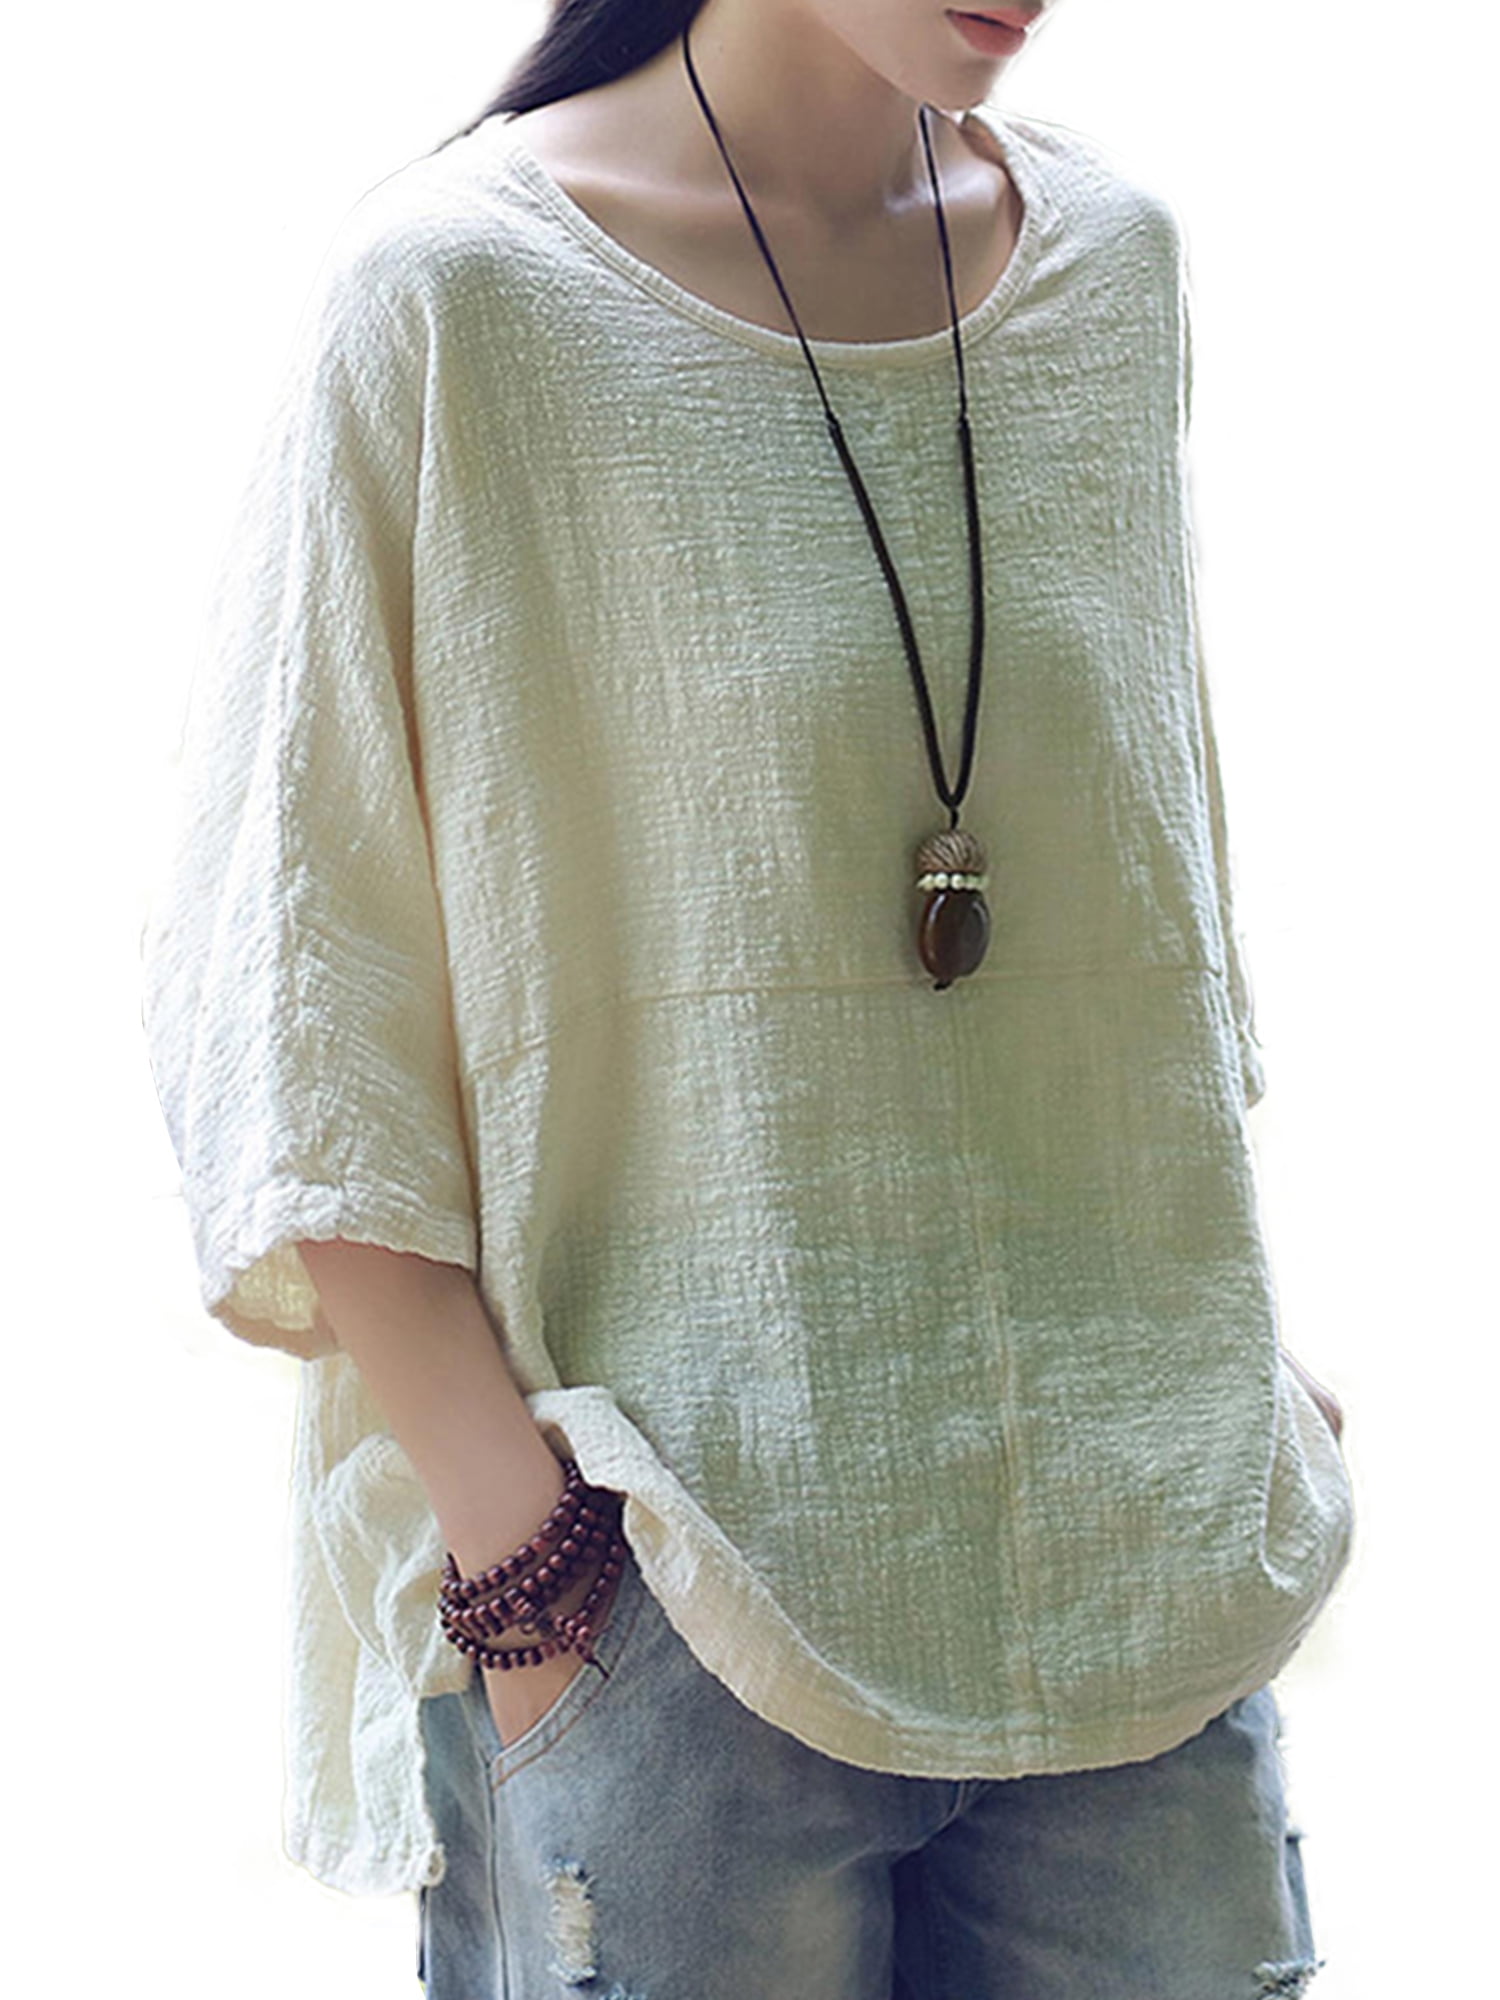 Summer Women Cotton Linen Tshirt Tops Casual 3/4 Roll Sleeve V Neck Tunic Tees Fashion Solid Color Flowy Button Blouse